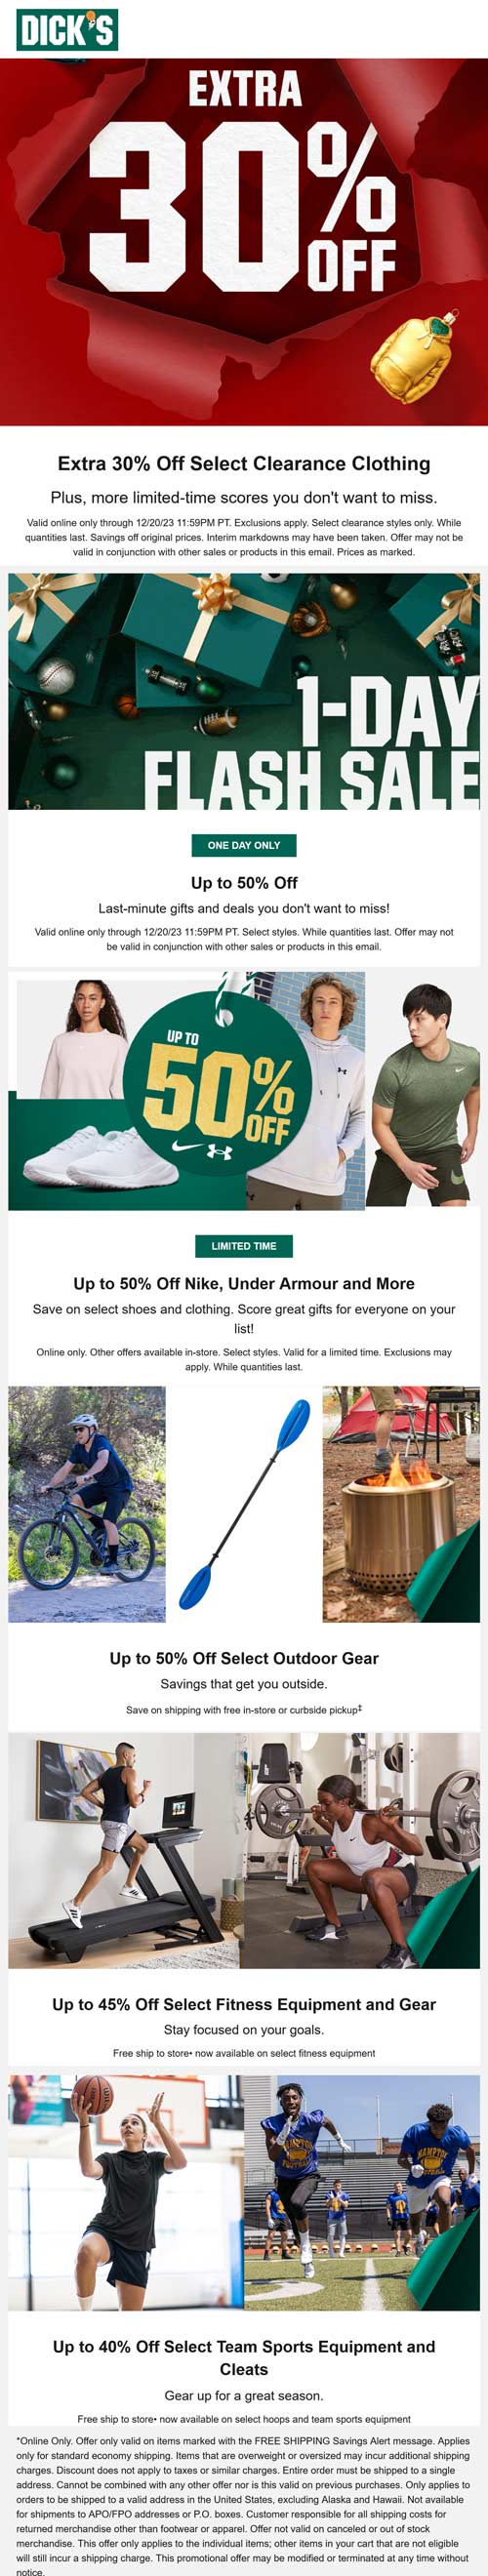 Dicks stores Coupon  Extra 30% off clearance apparel & more today at Dicks sporting goods #dicks 